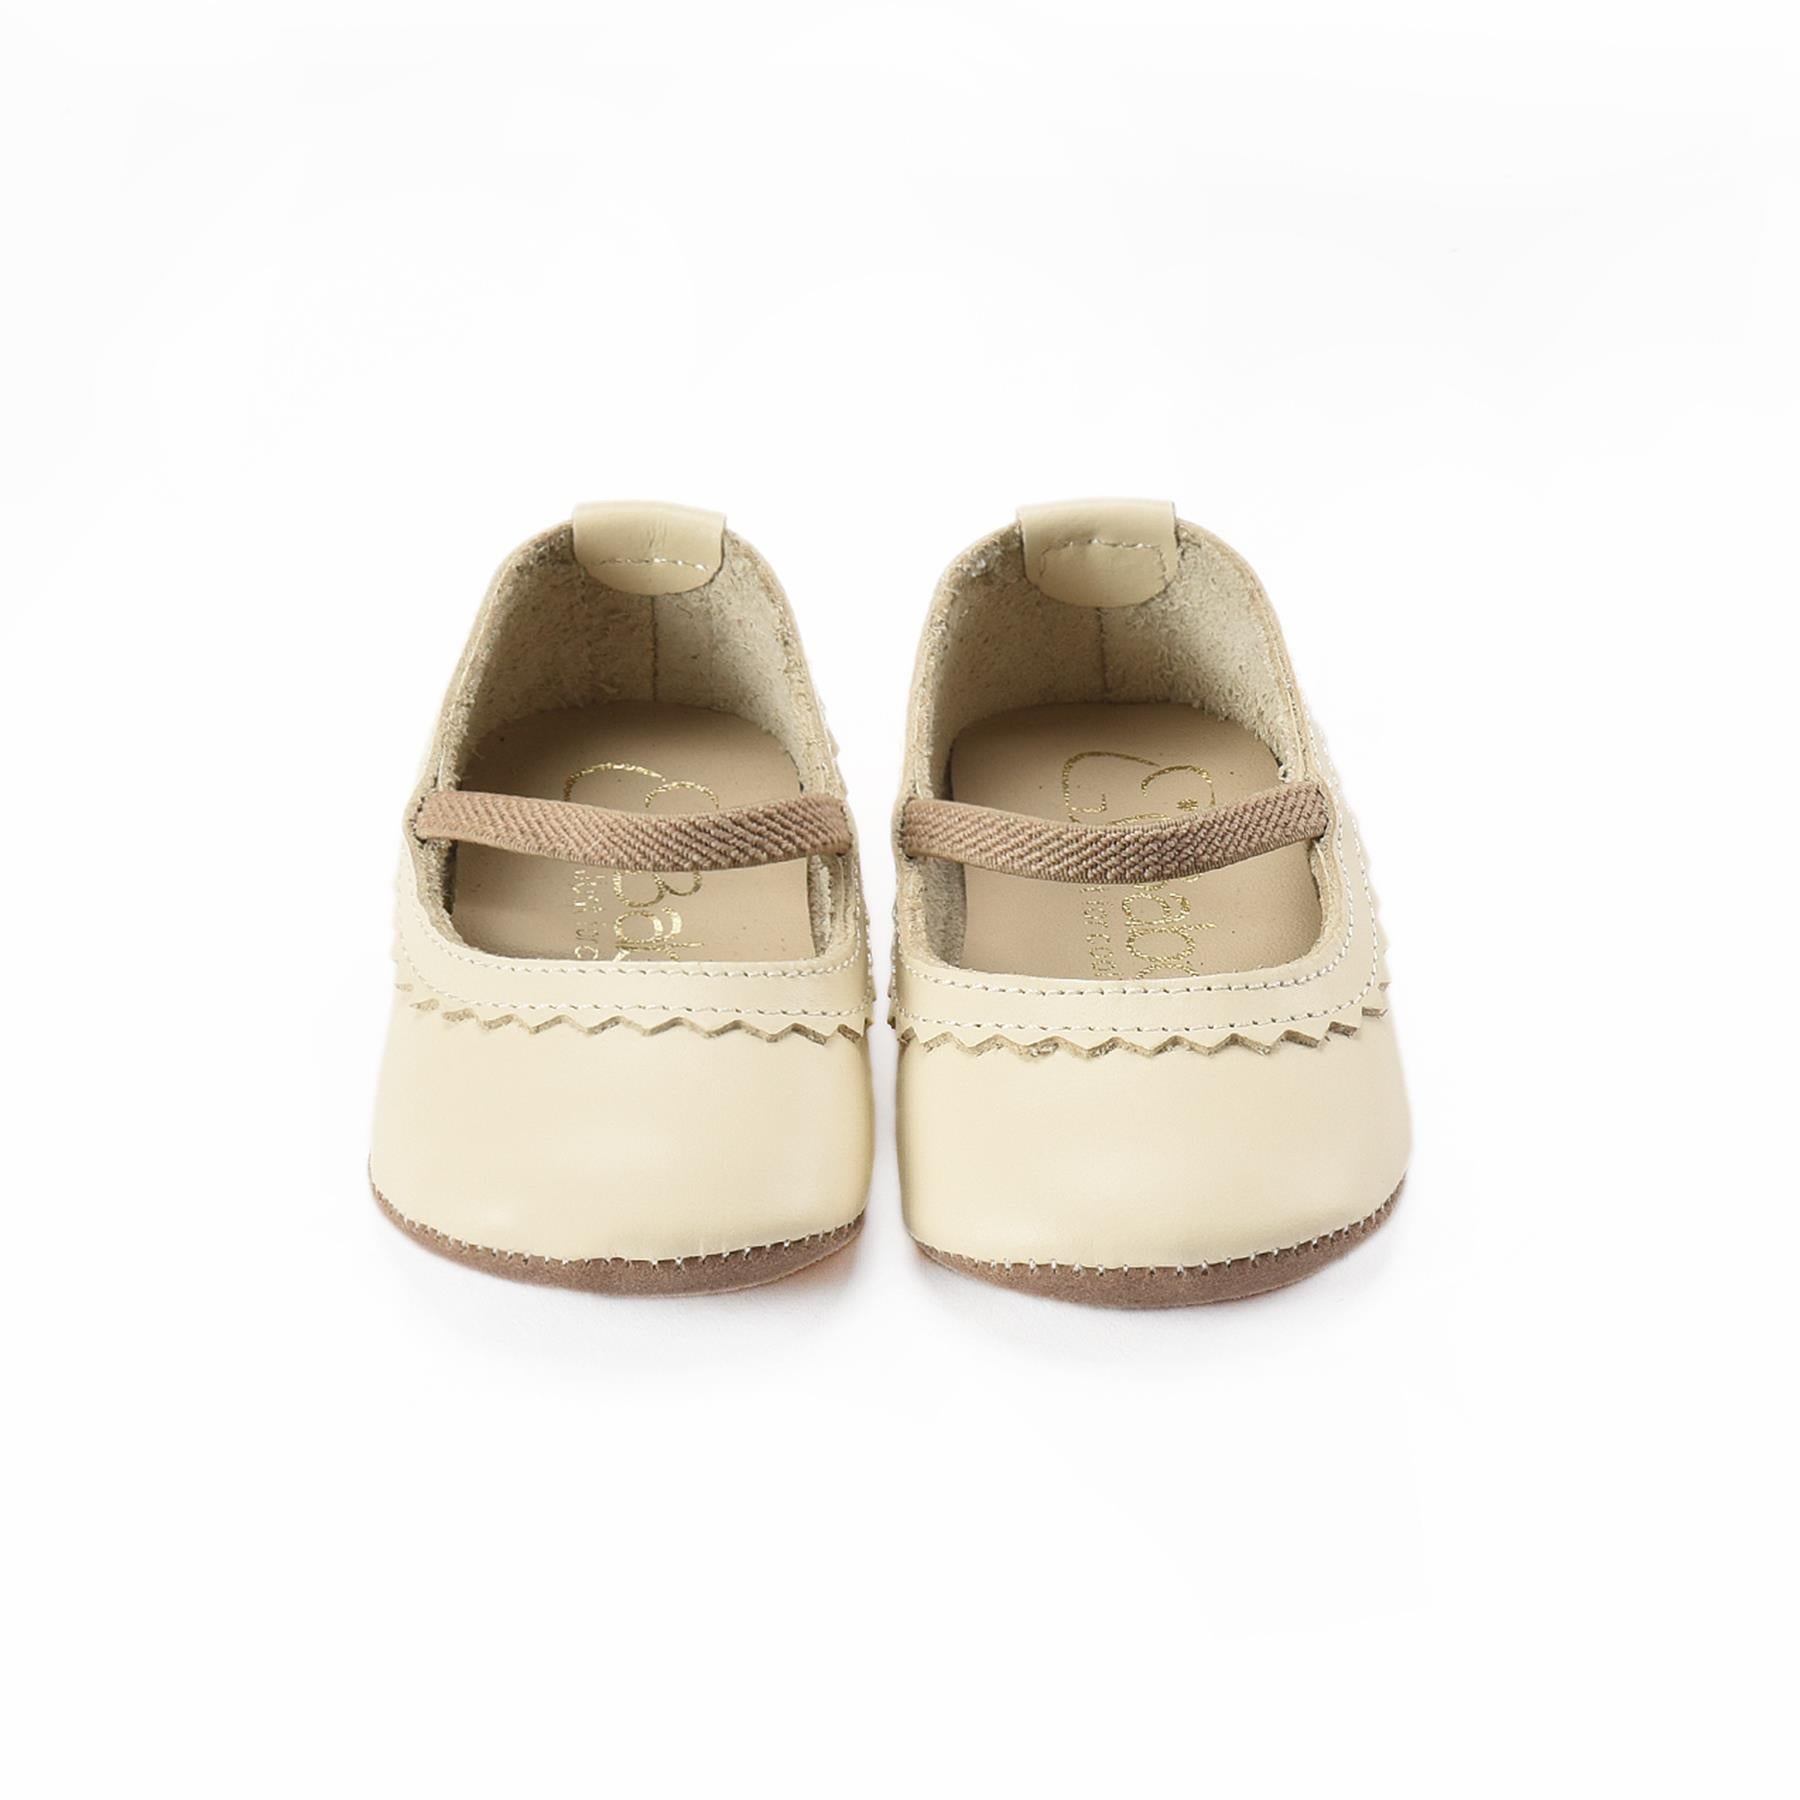 Leather Baby Booties Cream